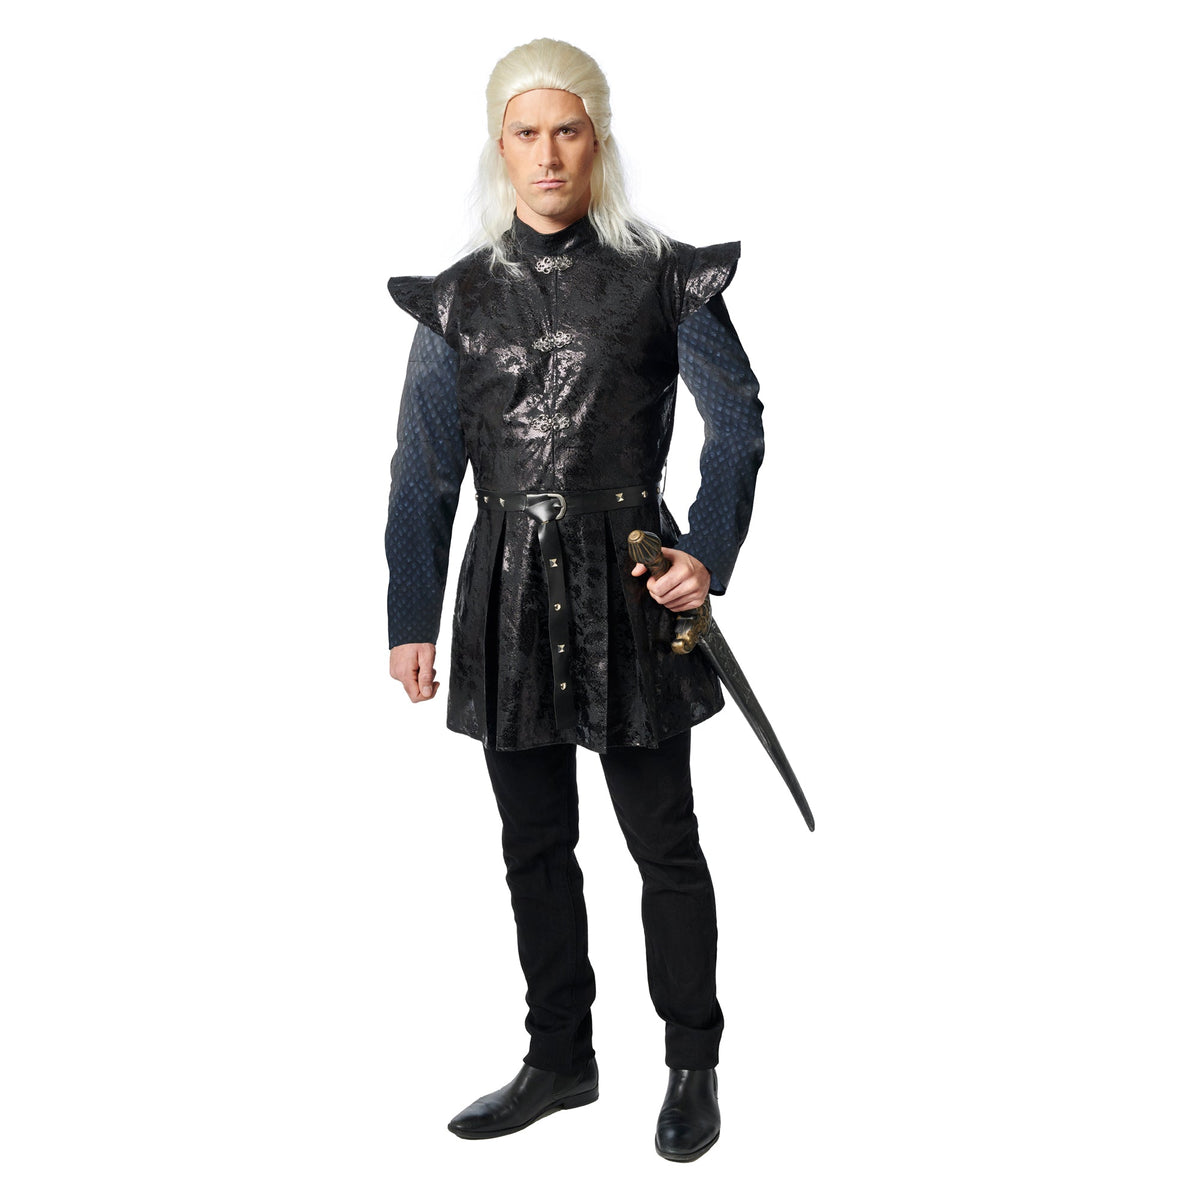 COSTUME CULTURE BY FRANCO Costumes Ancient Prince Costume for Adults, Black Tunic, The Witcher